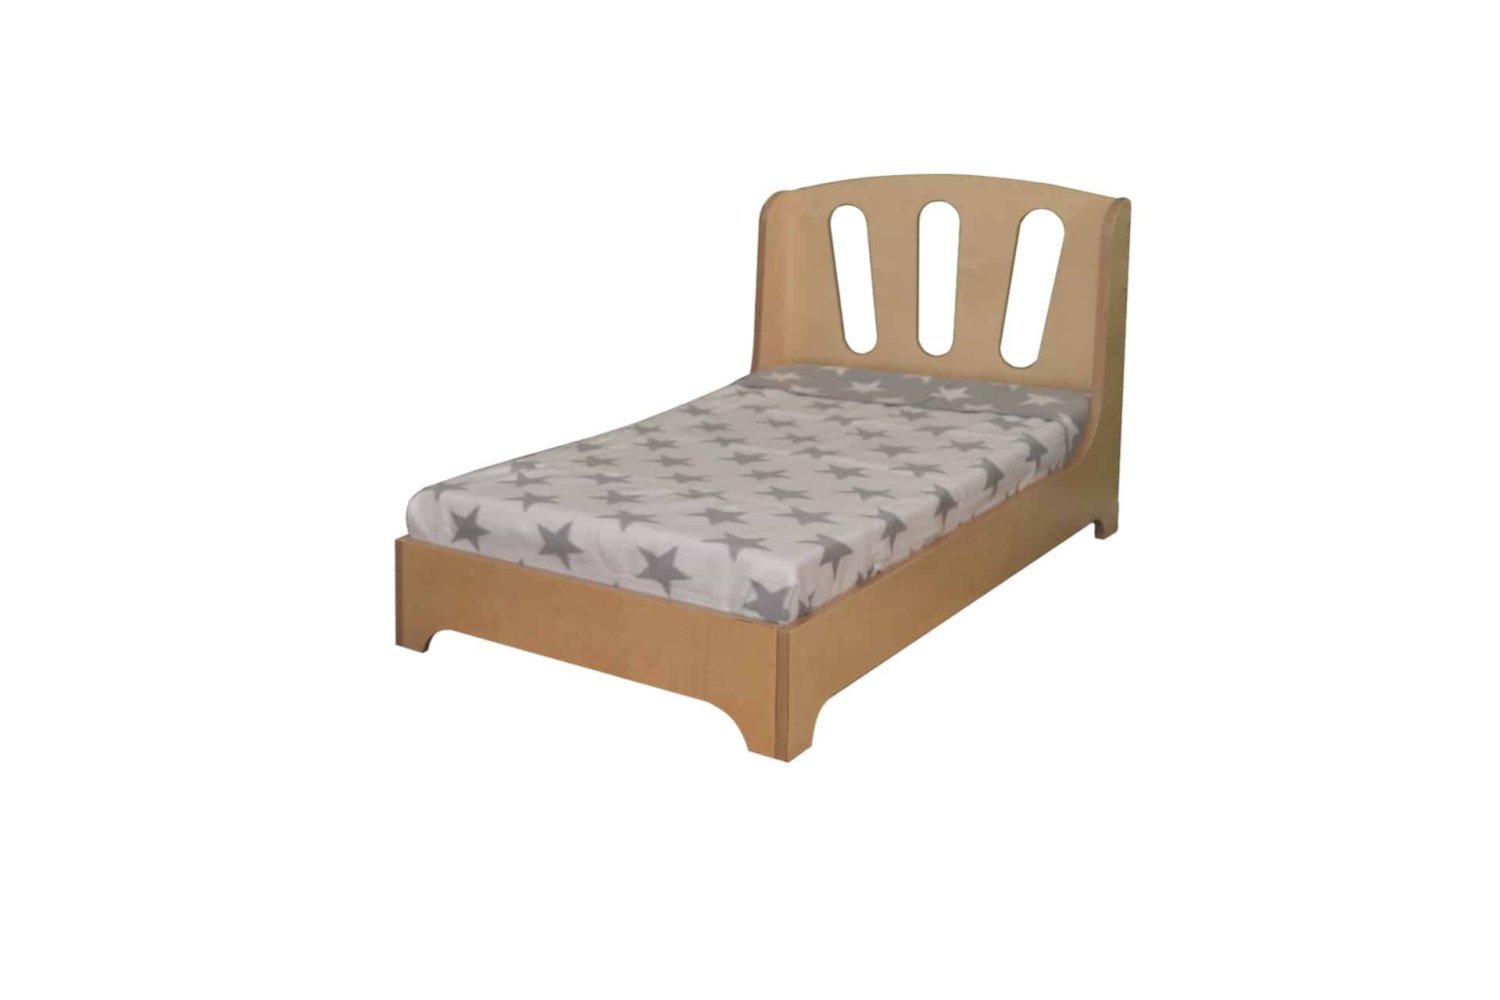 Junior play bed